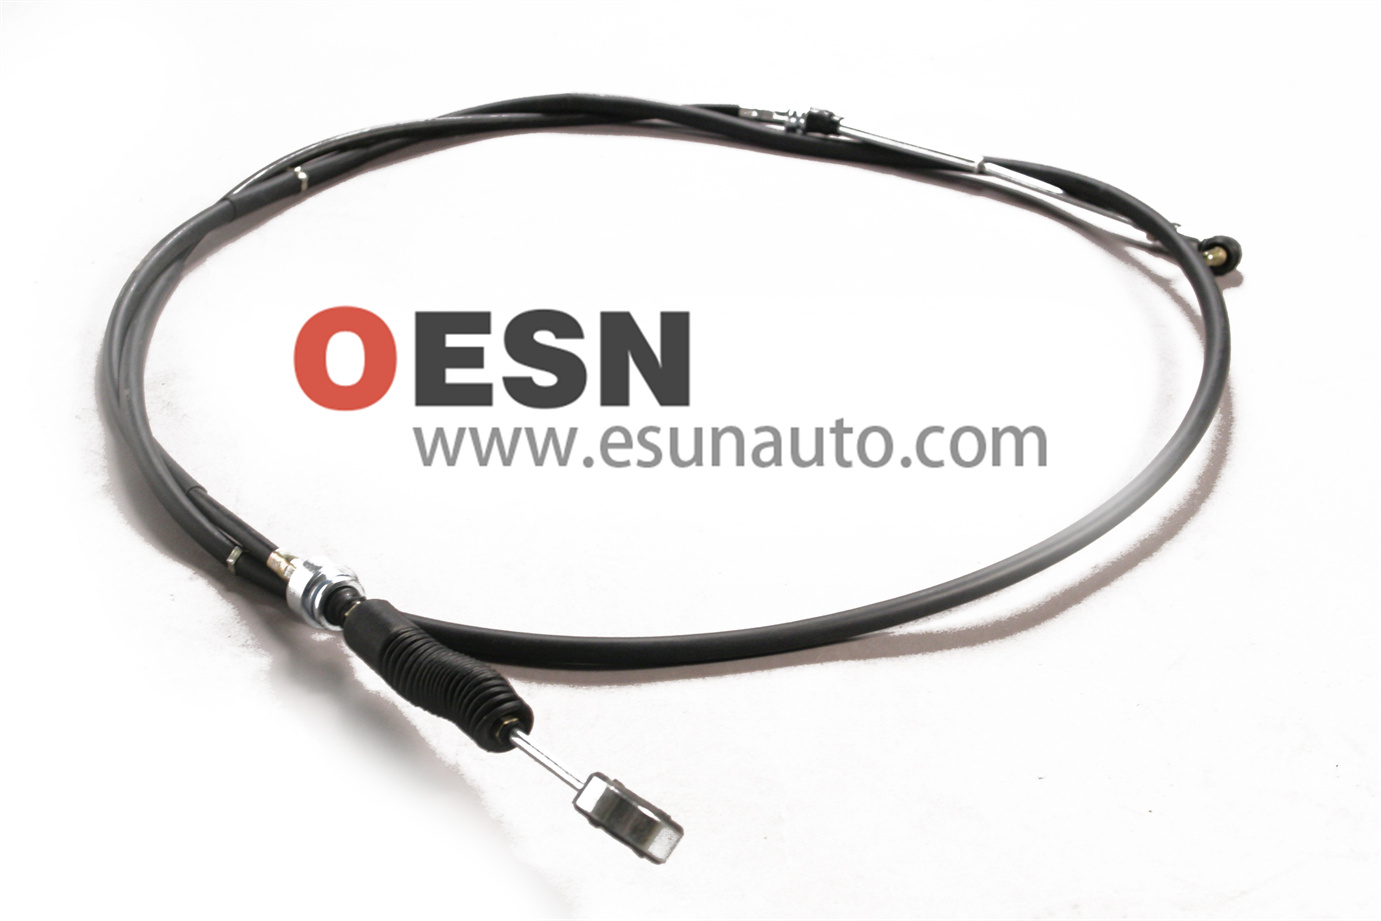 Gear shift cable  ESN70026  OEM8970965113  8973504350  8973504270